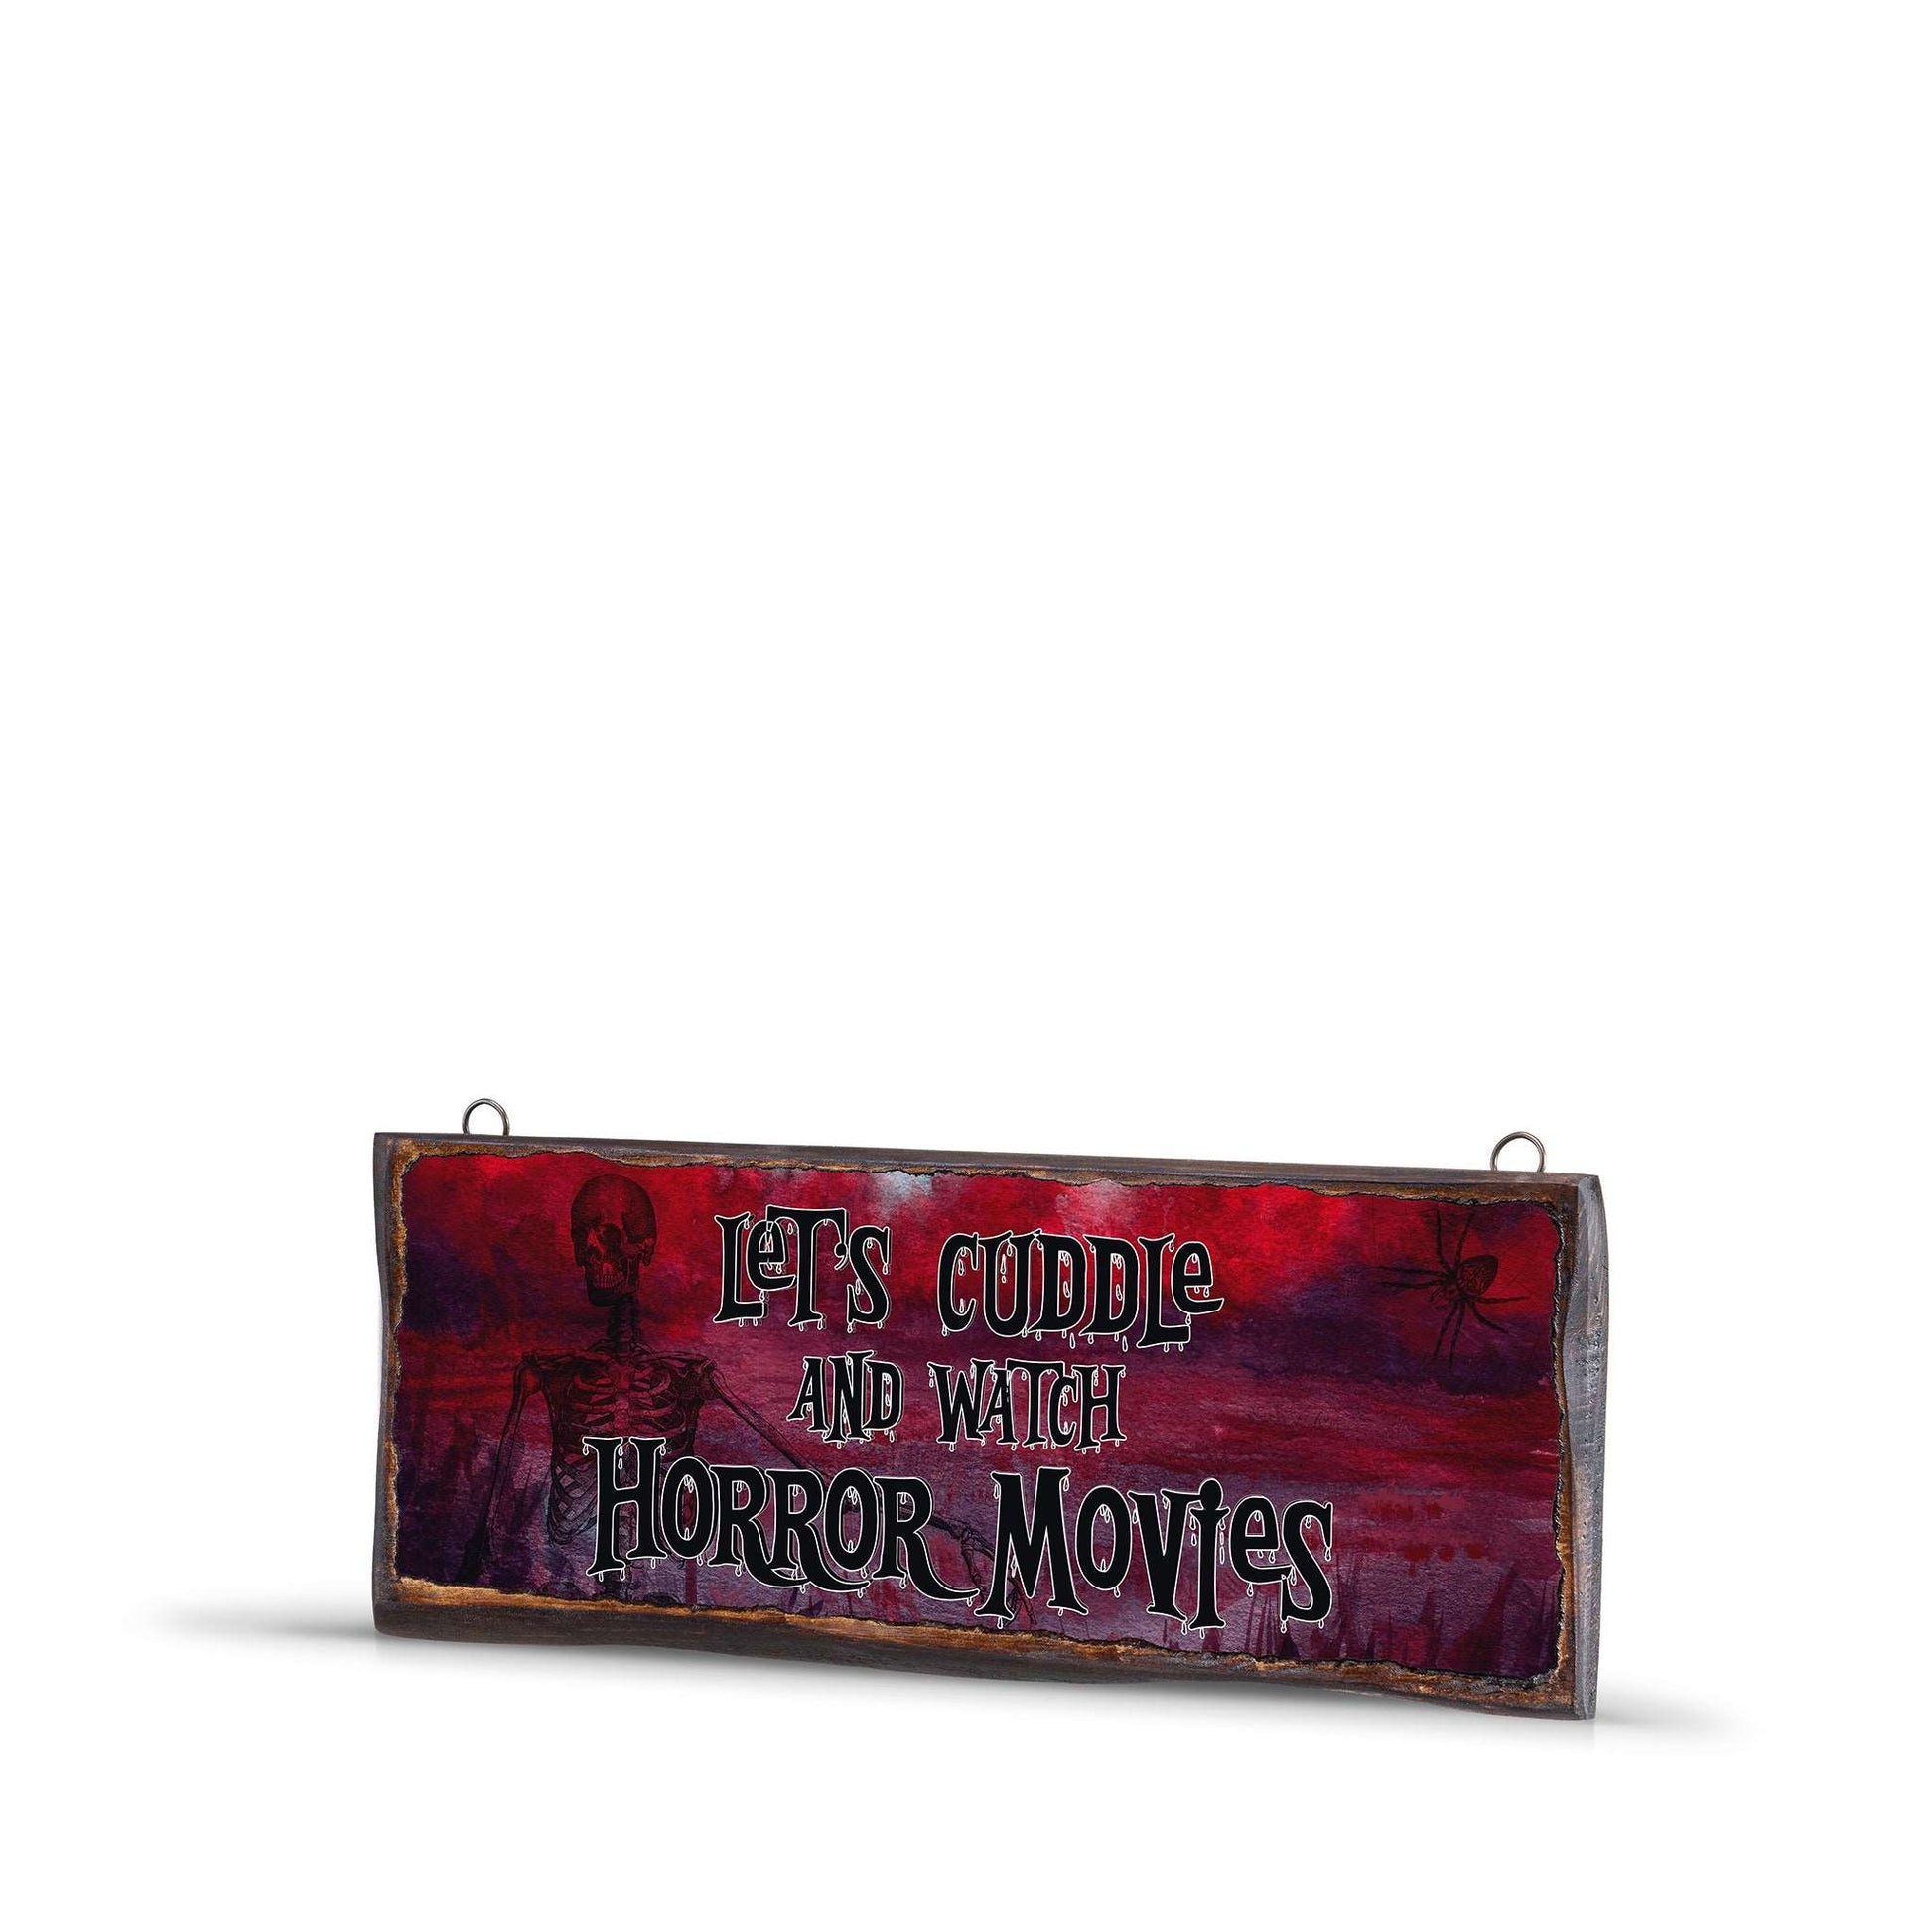 LET'S CUDDLE AND WATCH HORROR MOVIES WOODEN SIGN-WS010 - Apnoia